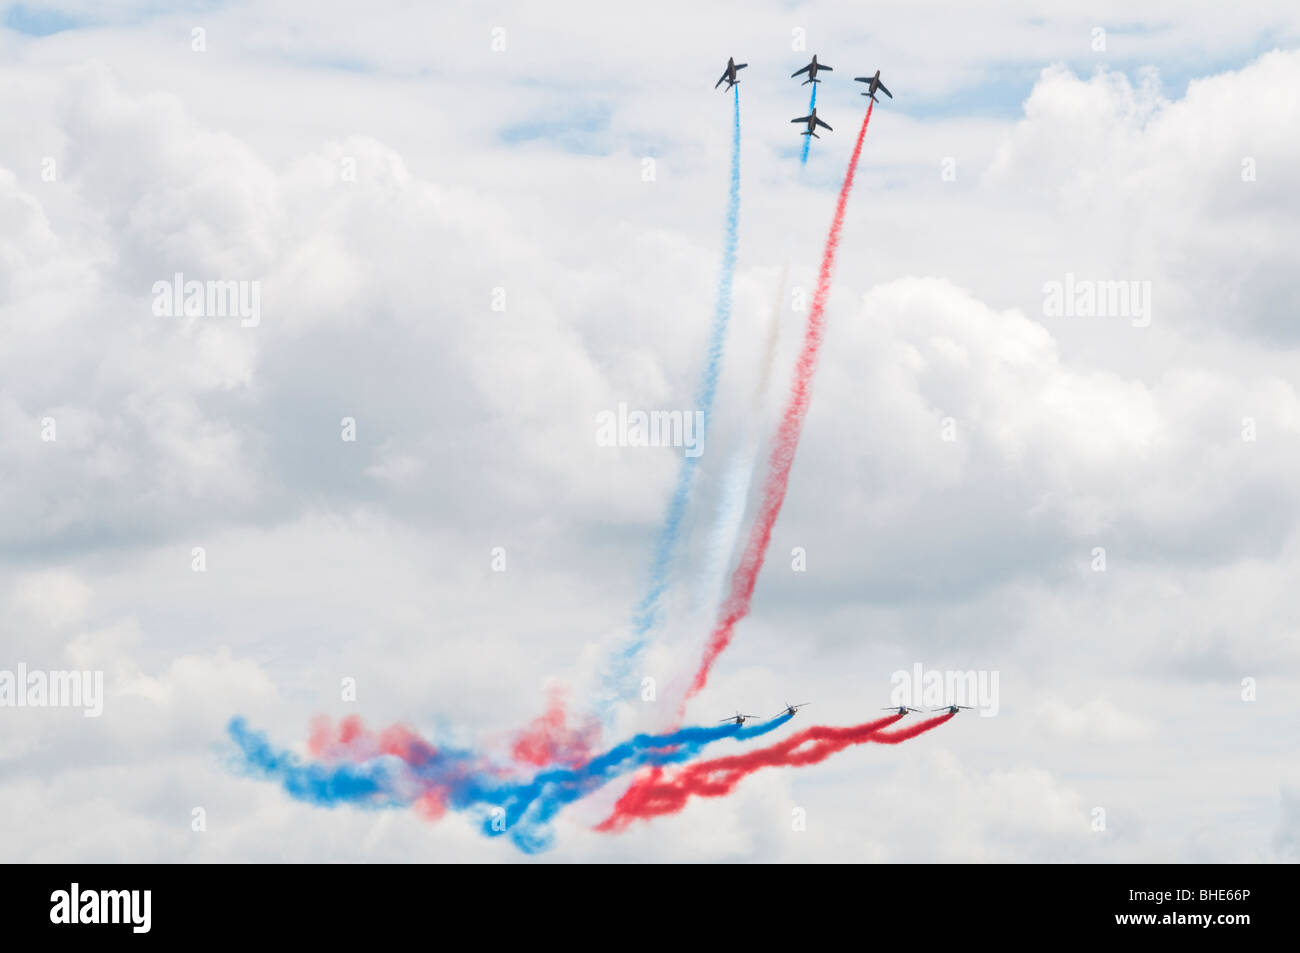 French Aerobatic display team flying in close formation trailing coloured smoke Stock Photo